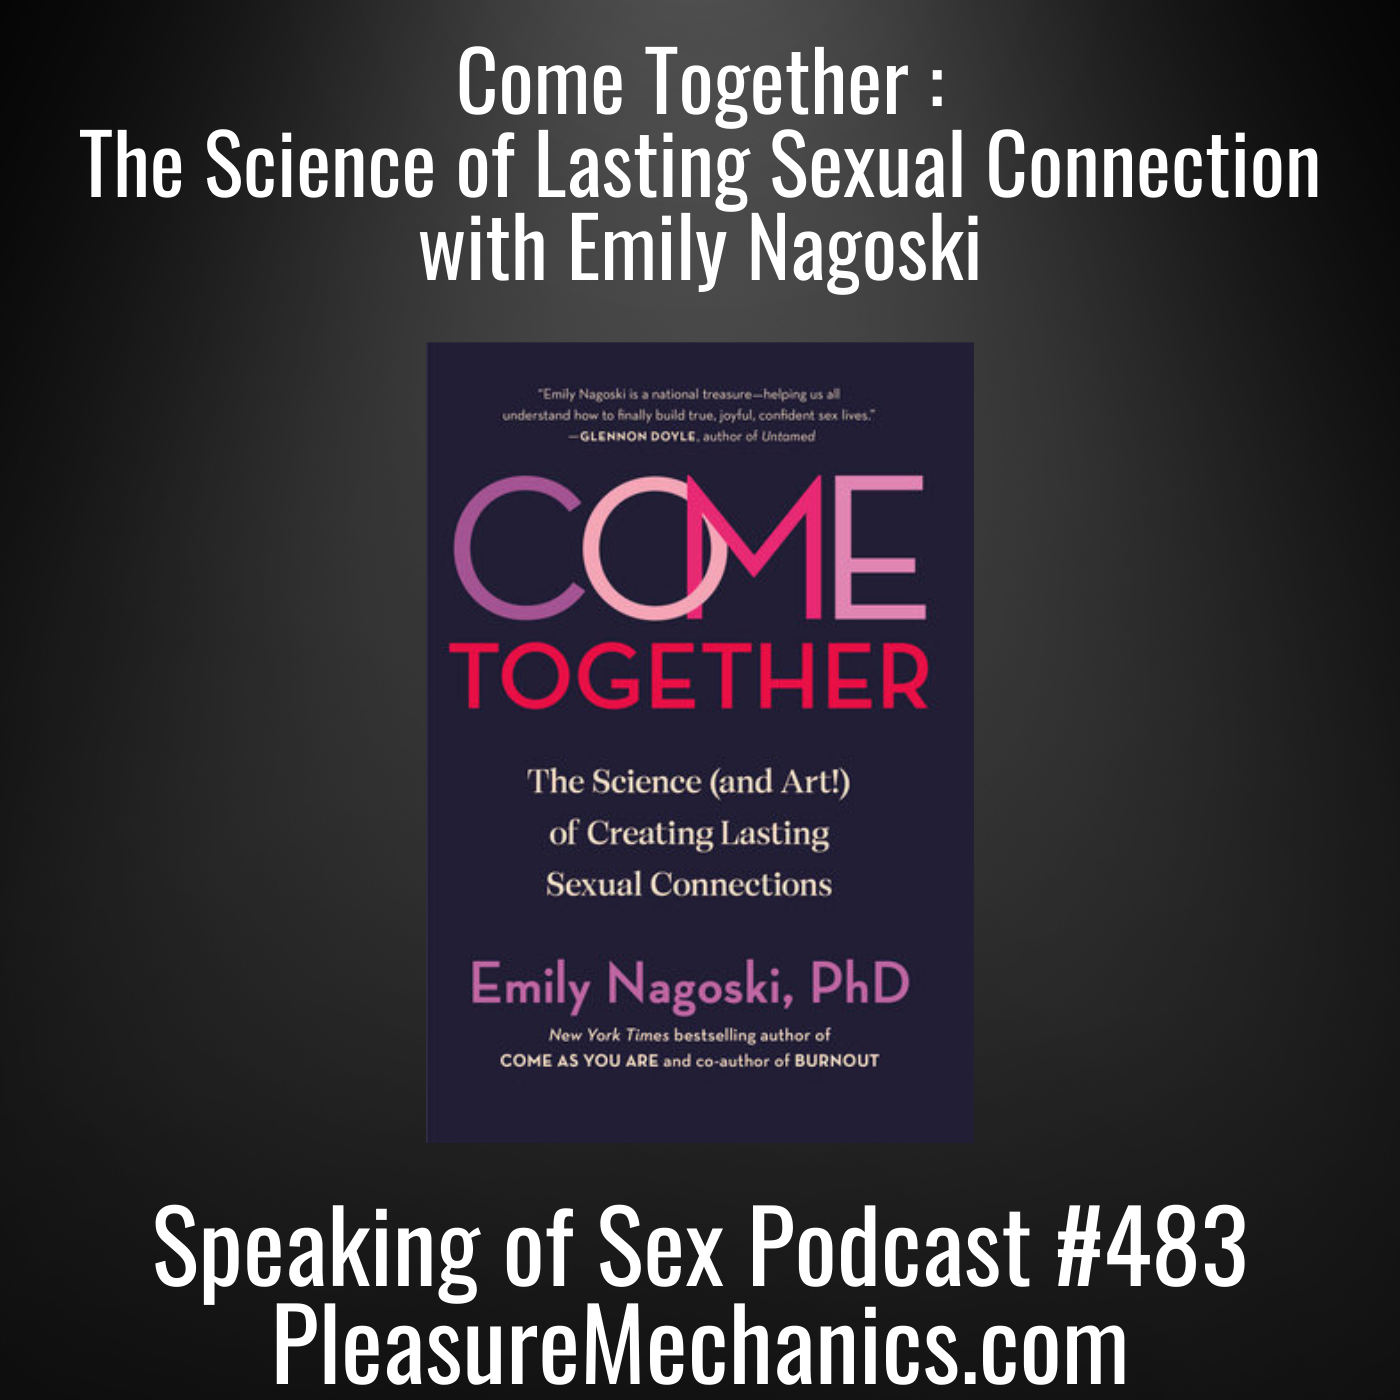 The Surprising Science of Lasting Sexual Connection: An Interview with Emily Nagoski